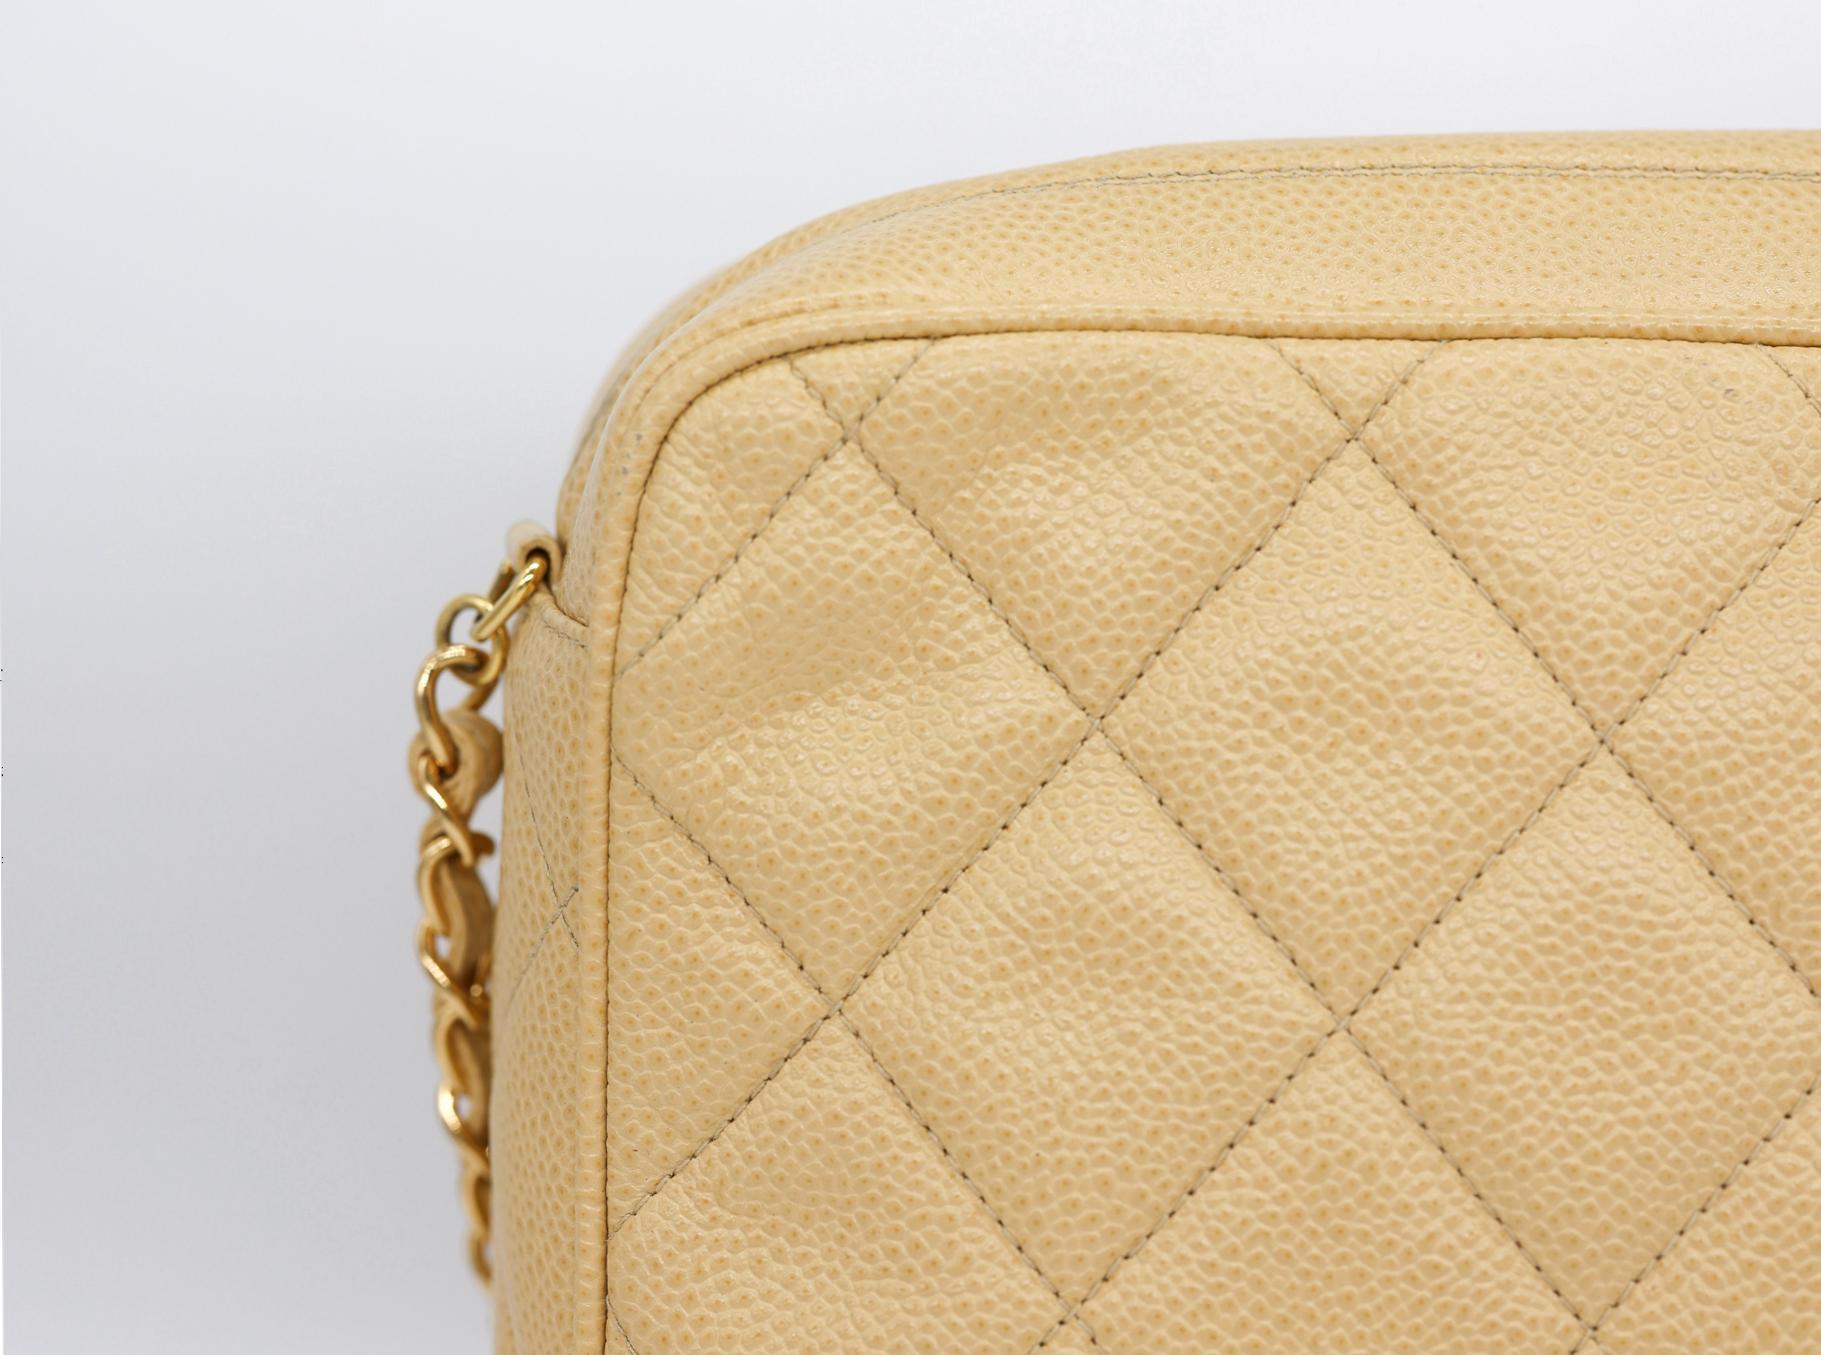 Chanel Vintage Quilted Caviar Leather Camera Bag with Gold Hardware, 1996 - 1997. 1